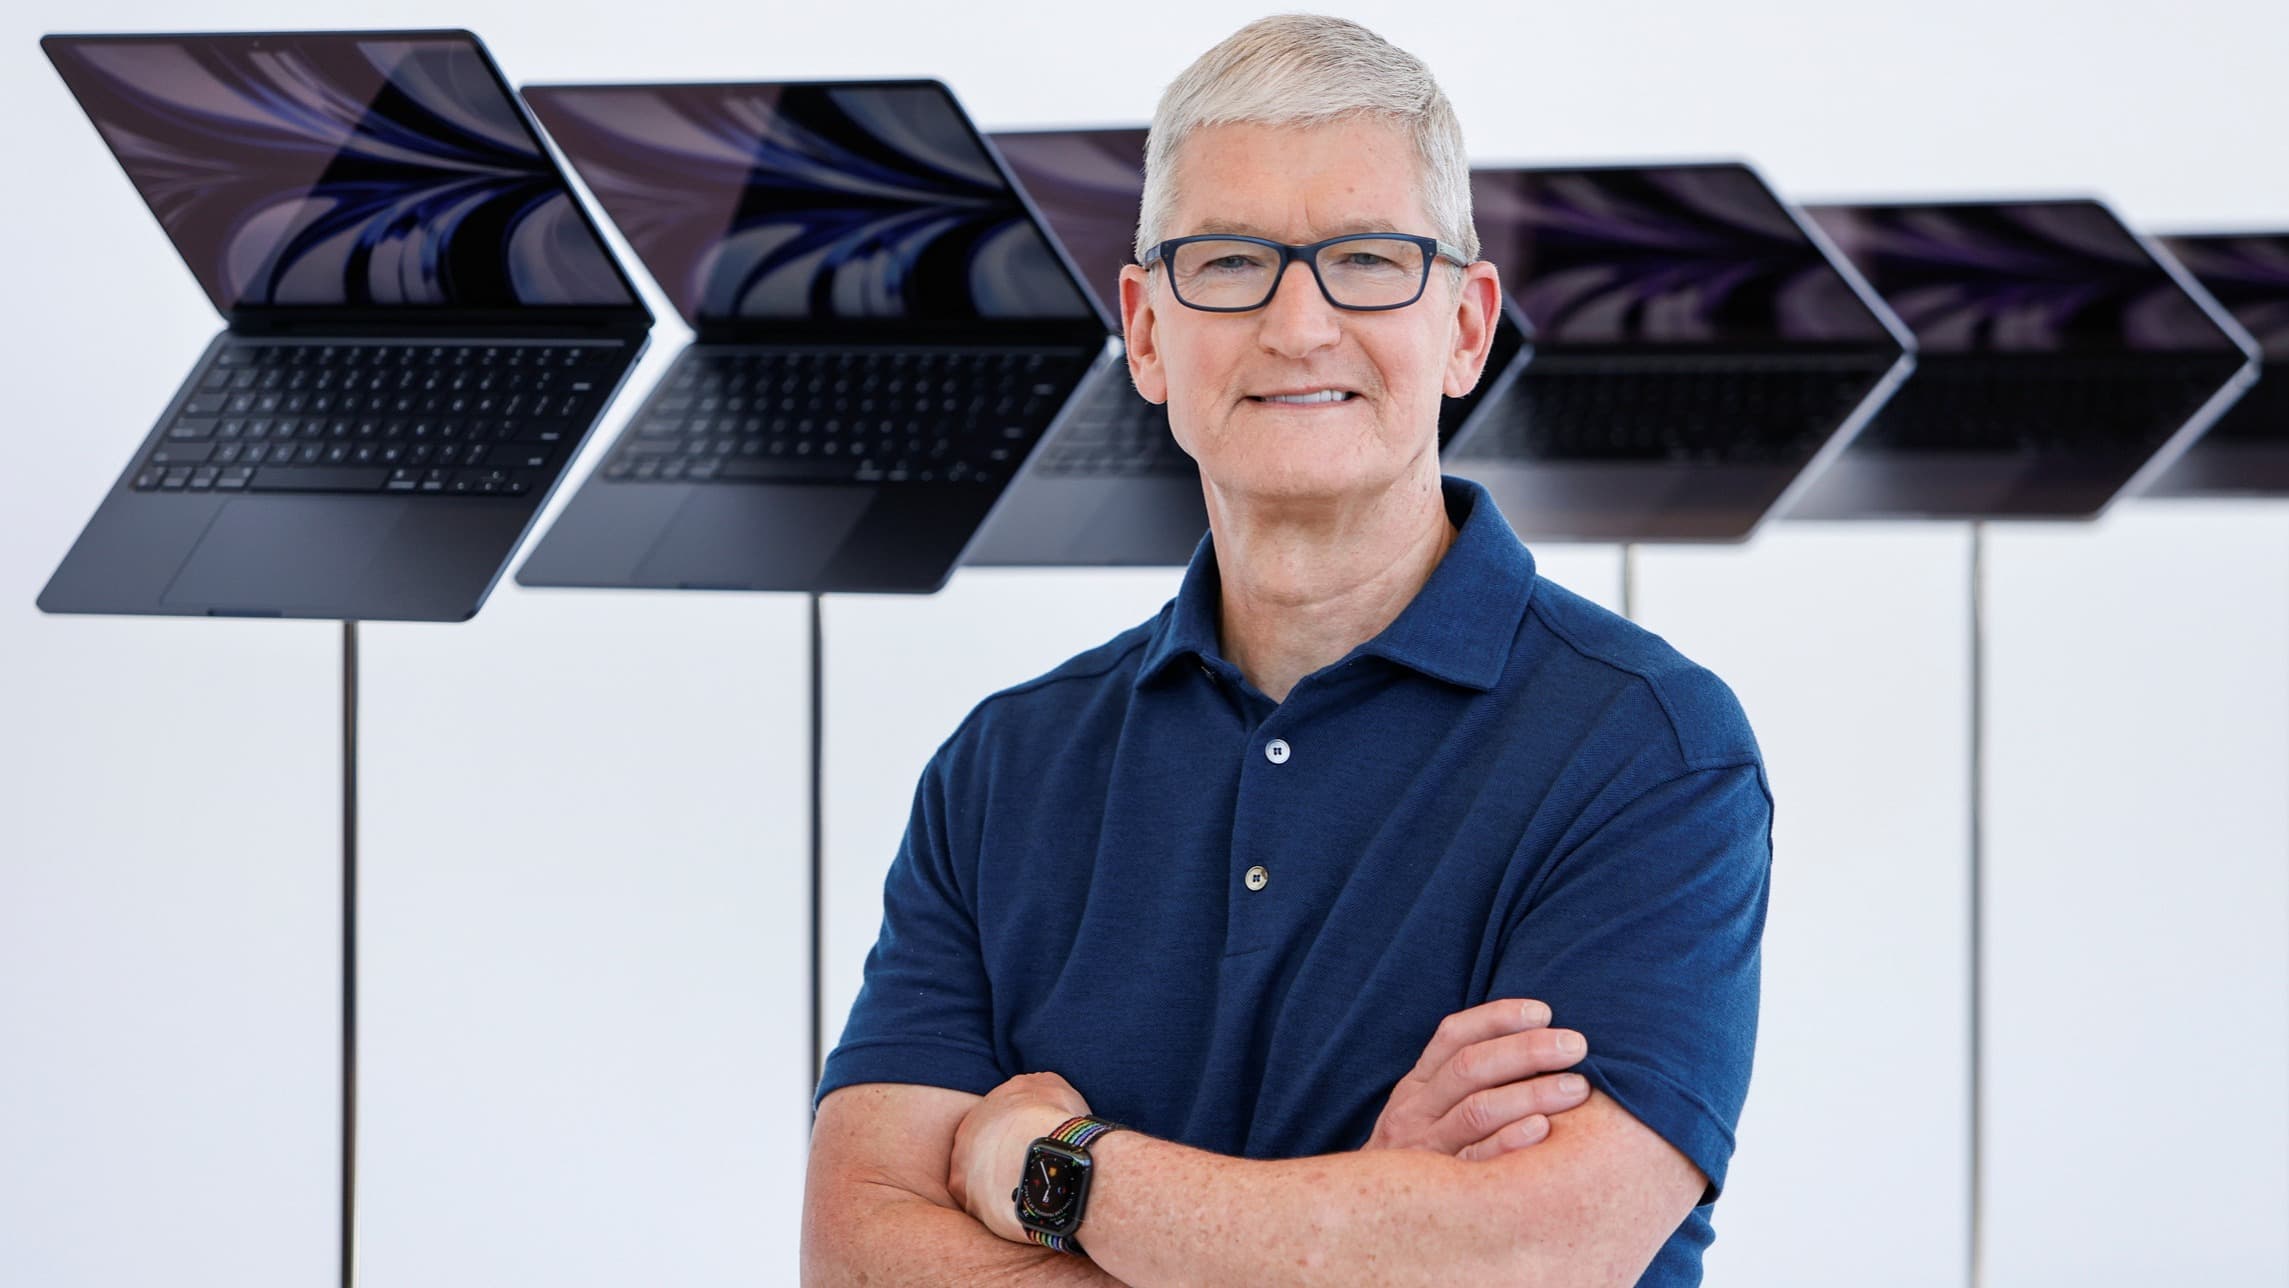 Almost all FAANG fired tens of thousands of employees except Apple, where the CEO cut his own pay